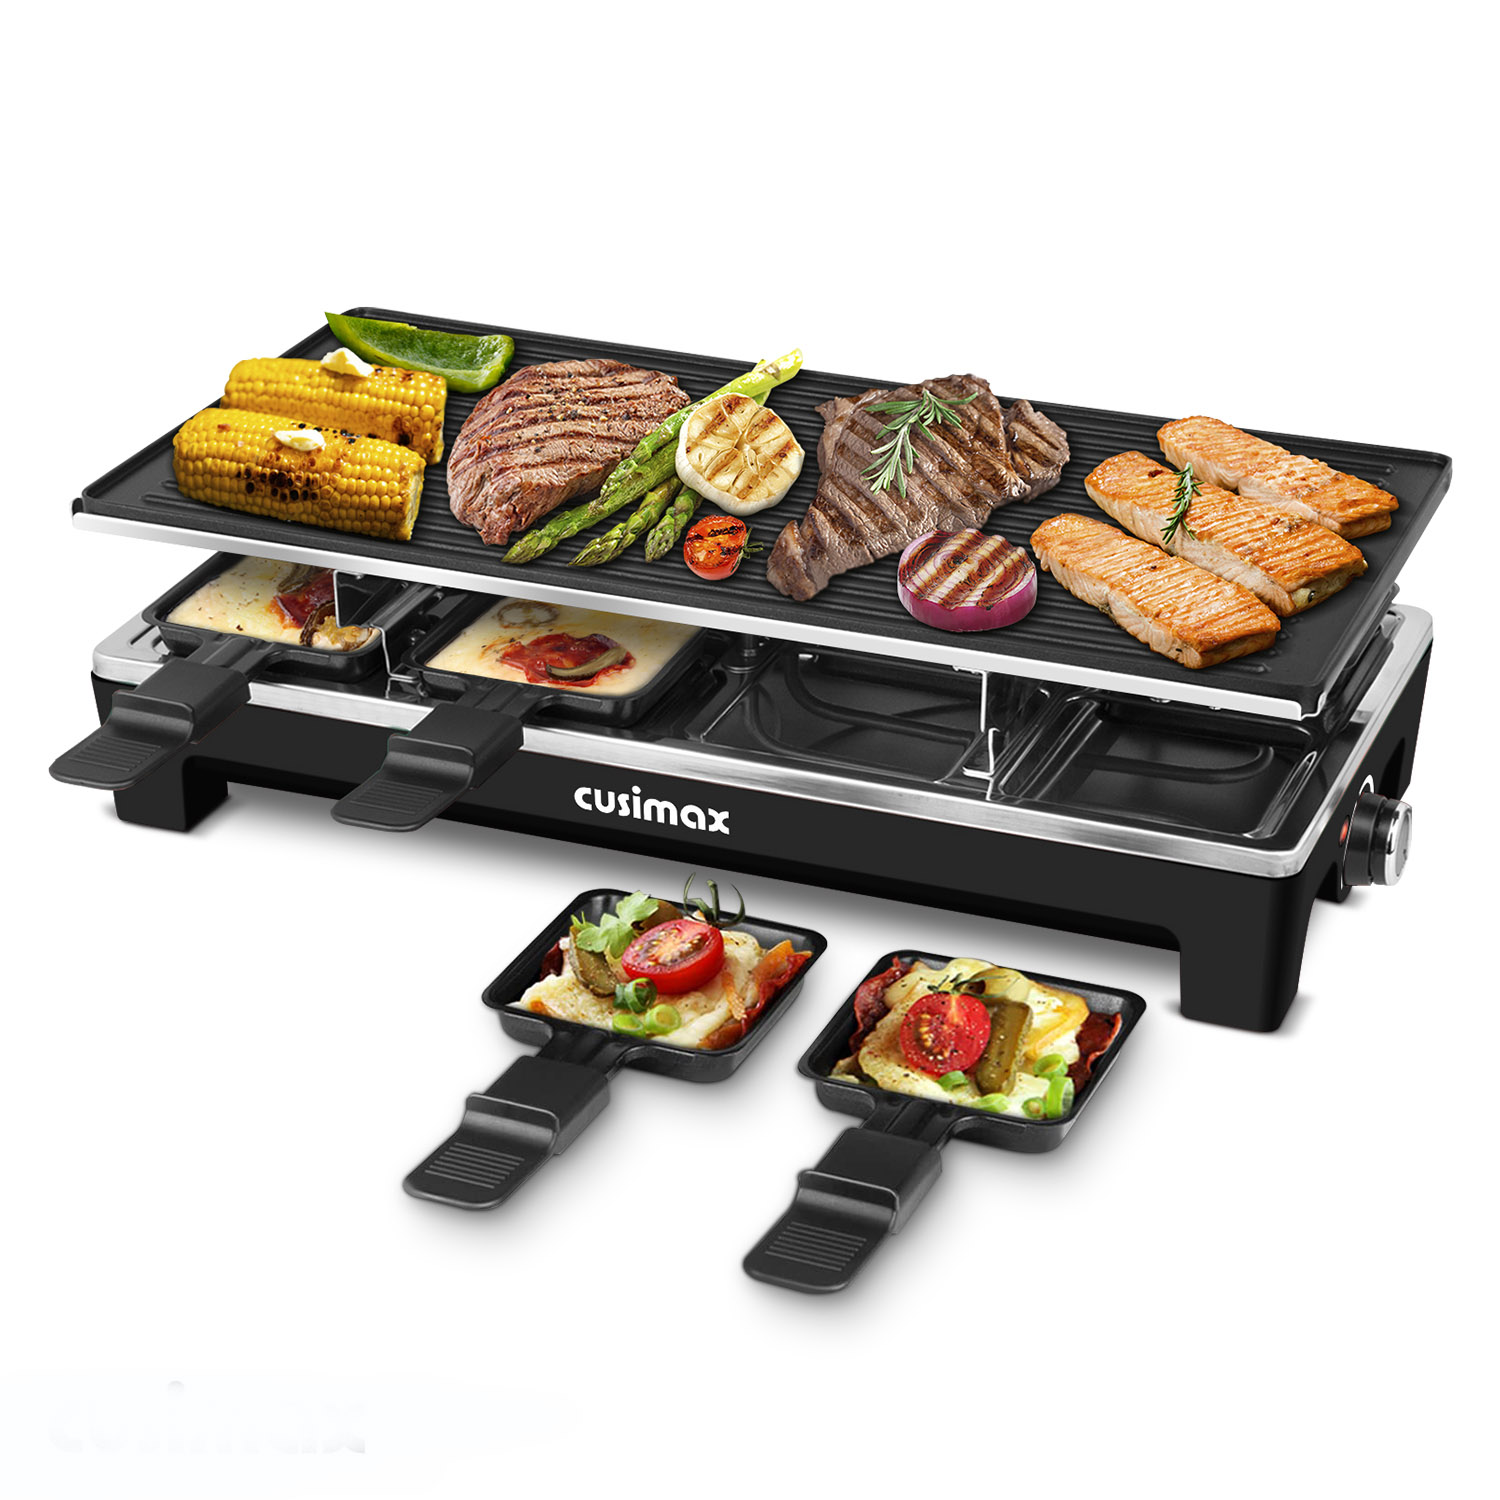 Techwood 1500W Indoor Smokeless Grill with 8 Level Control(Silver)